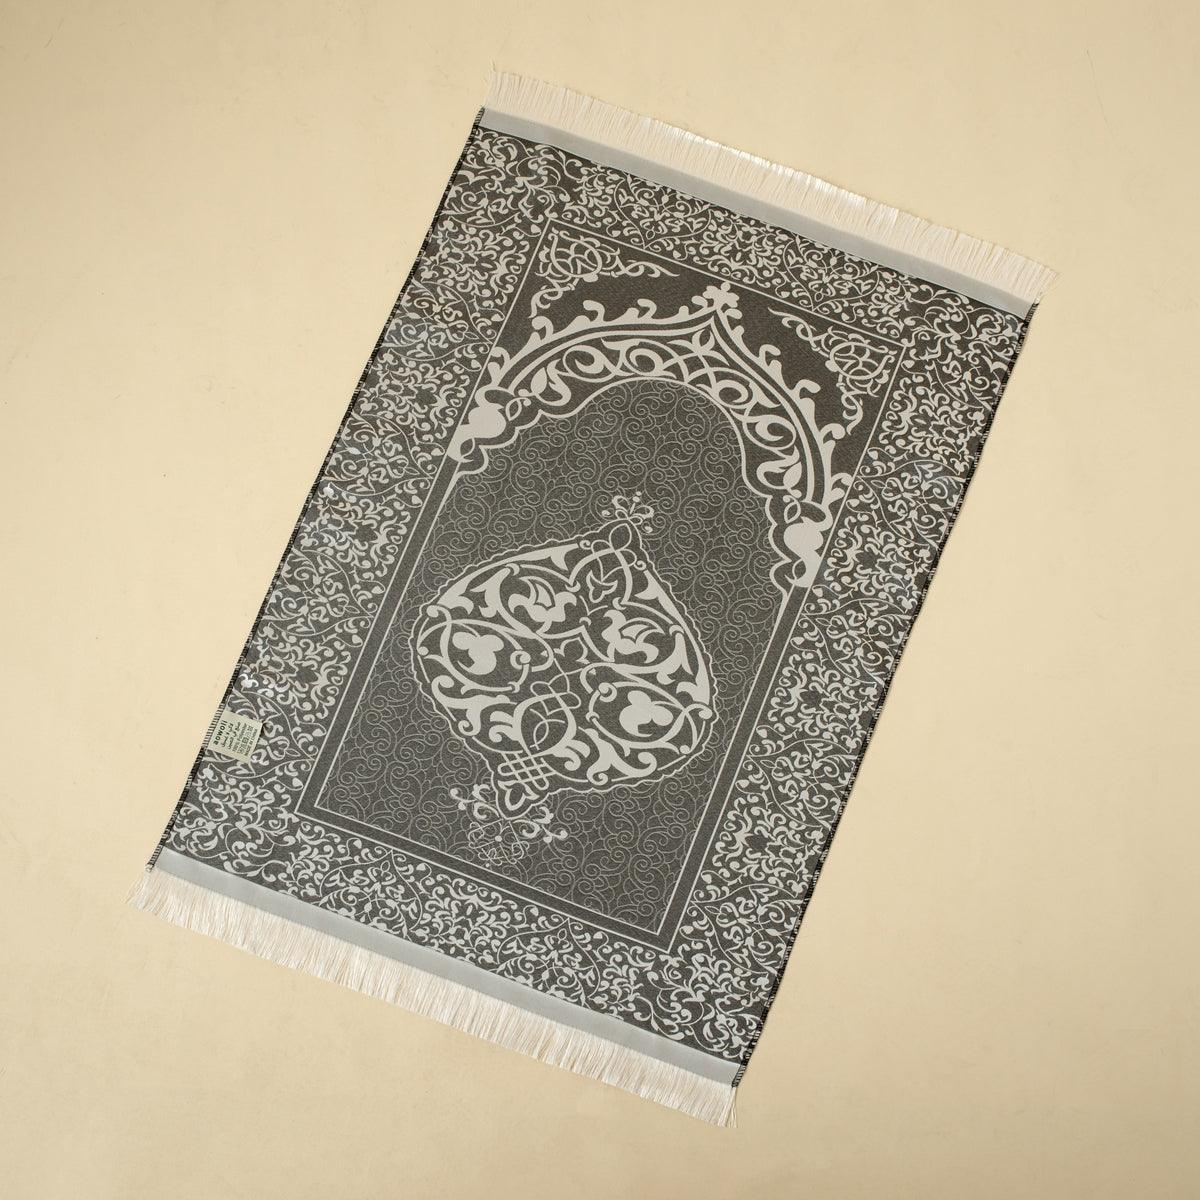 MR056 New Luxury Prayer Mat and Tasbeeh Set - Mariam's Collection